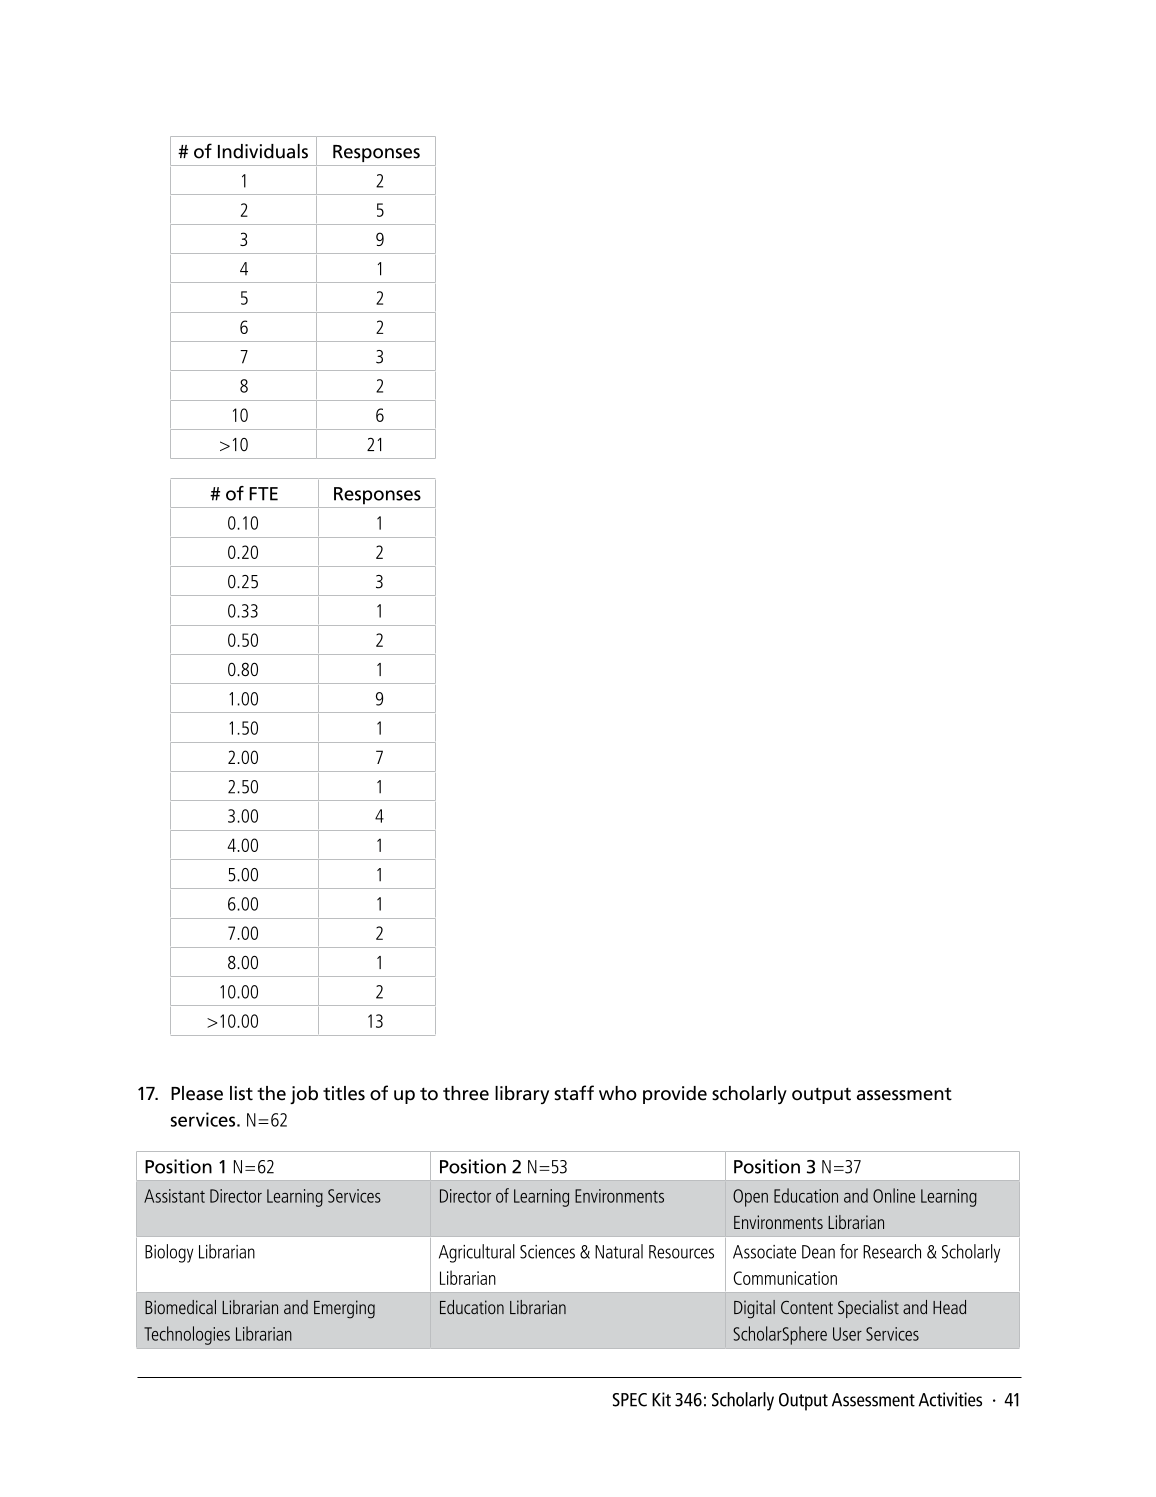 SPEC Kit 346: Scholarly Output Assessment Activities (May 2015) page 41